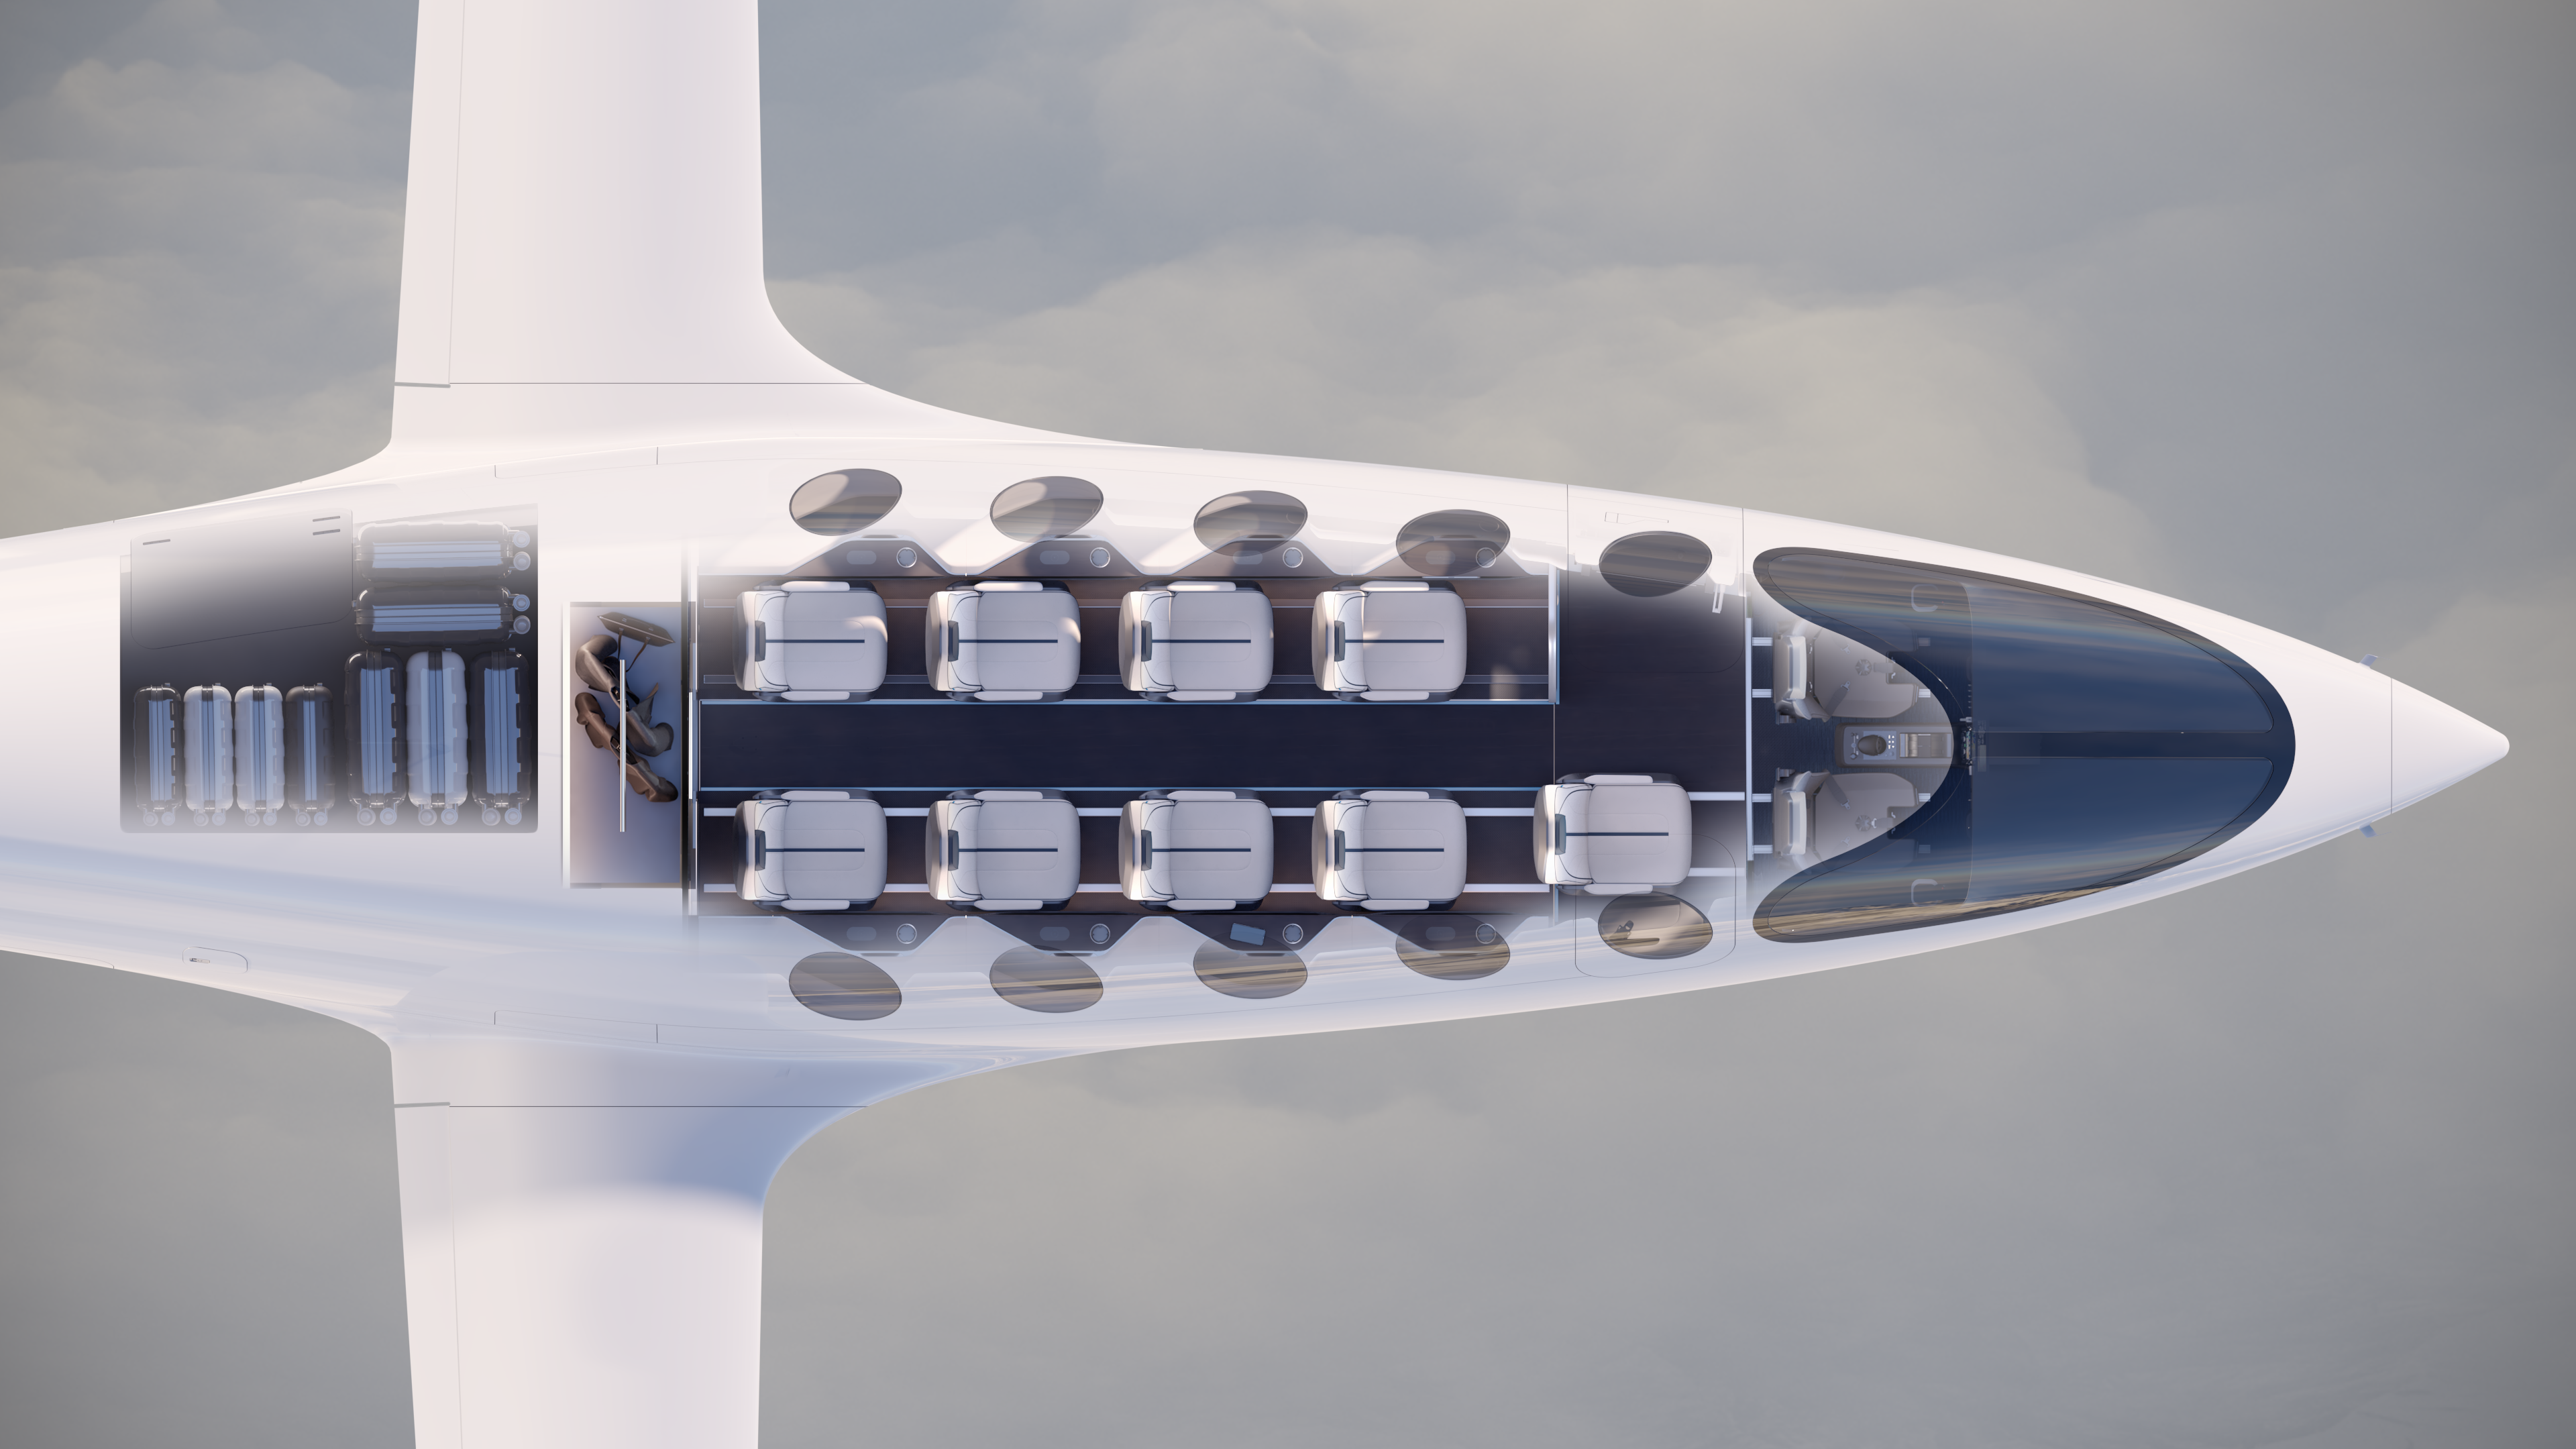 A rendering of Eviation's electric plane, named Alice, pictured from above with a view of the plane's interior